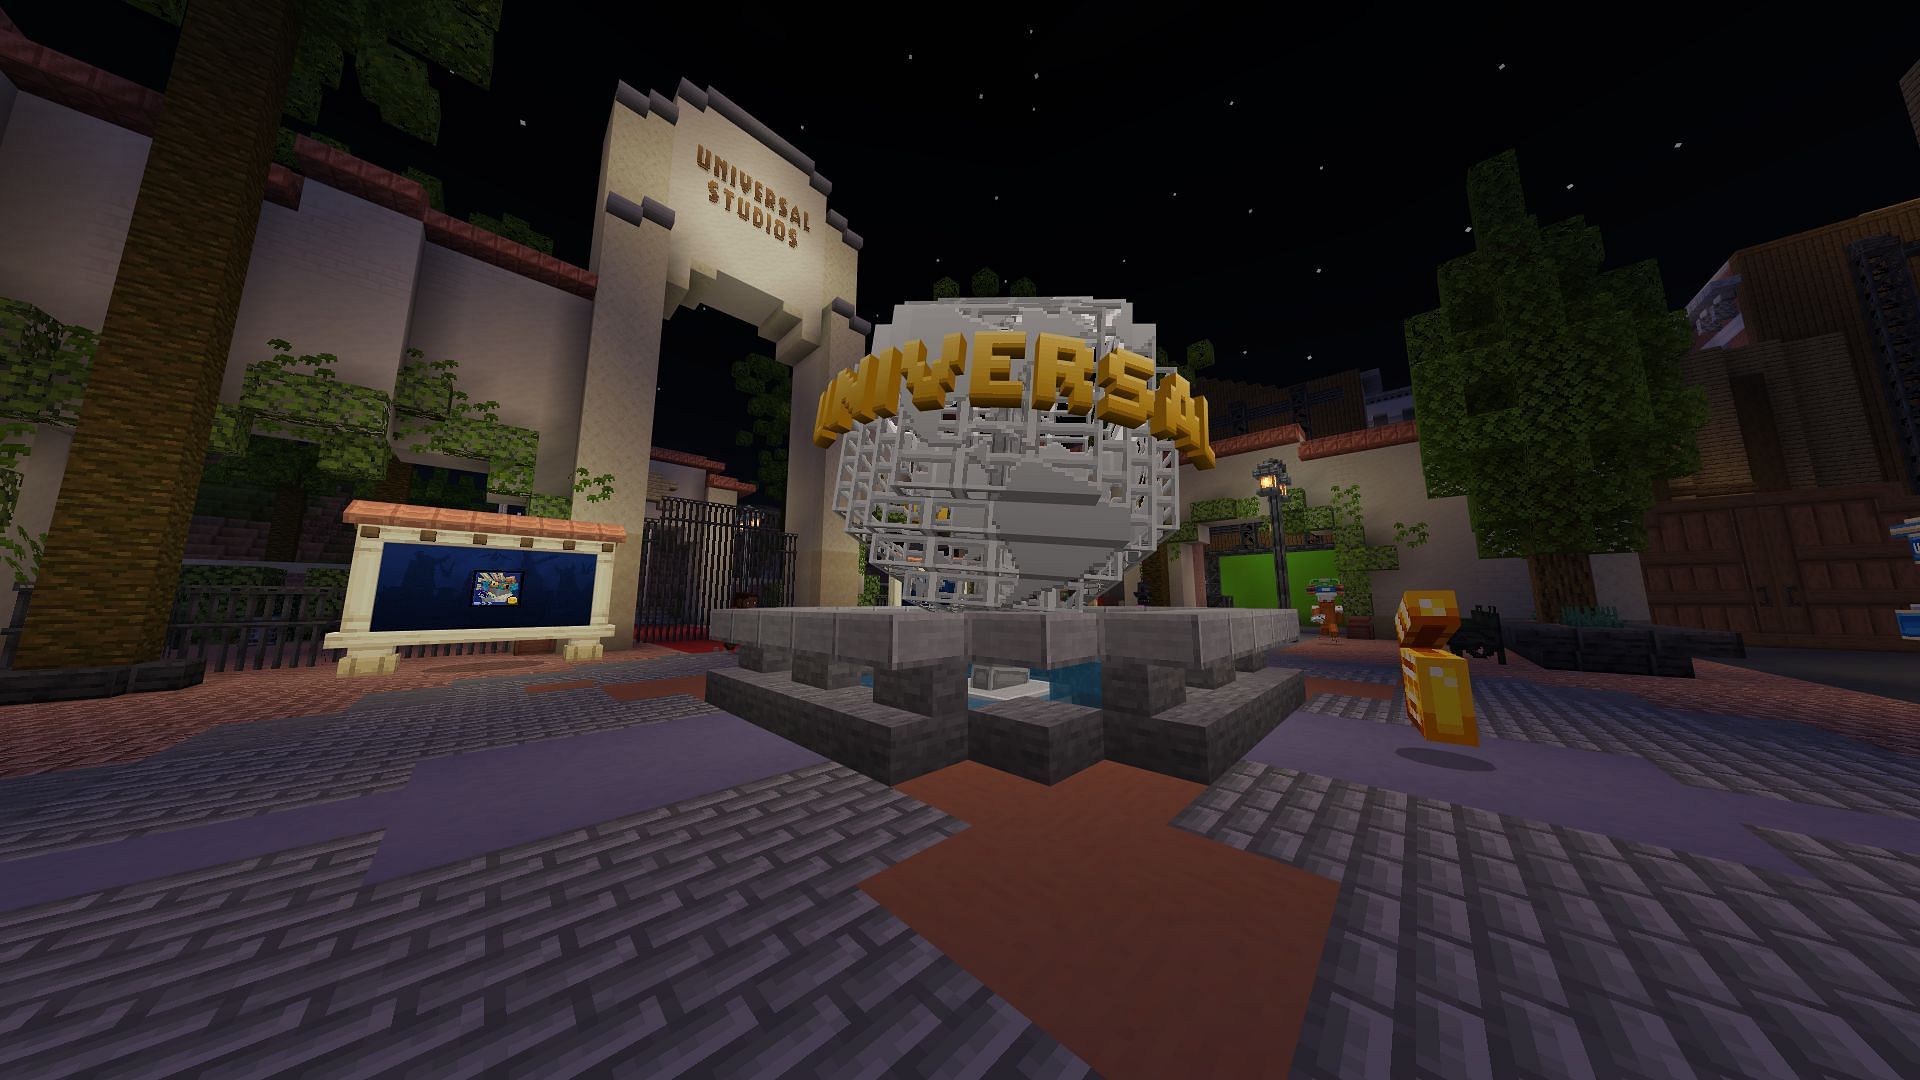 A studio tour for Universal Studios Hollywood is currently available in Minecraft Bedrock (Image via Mojang)